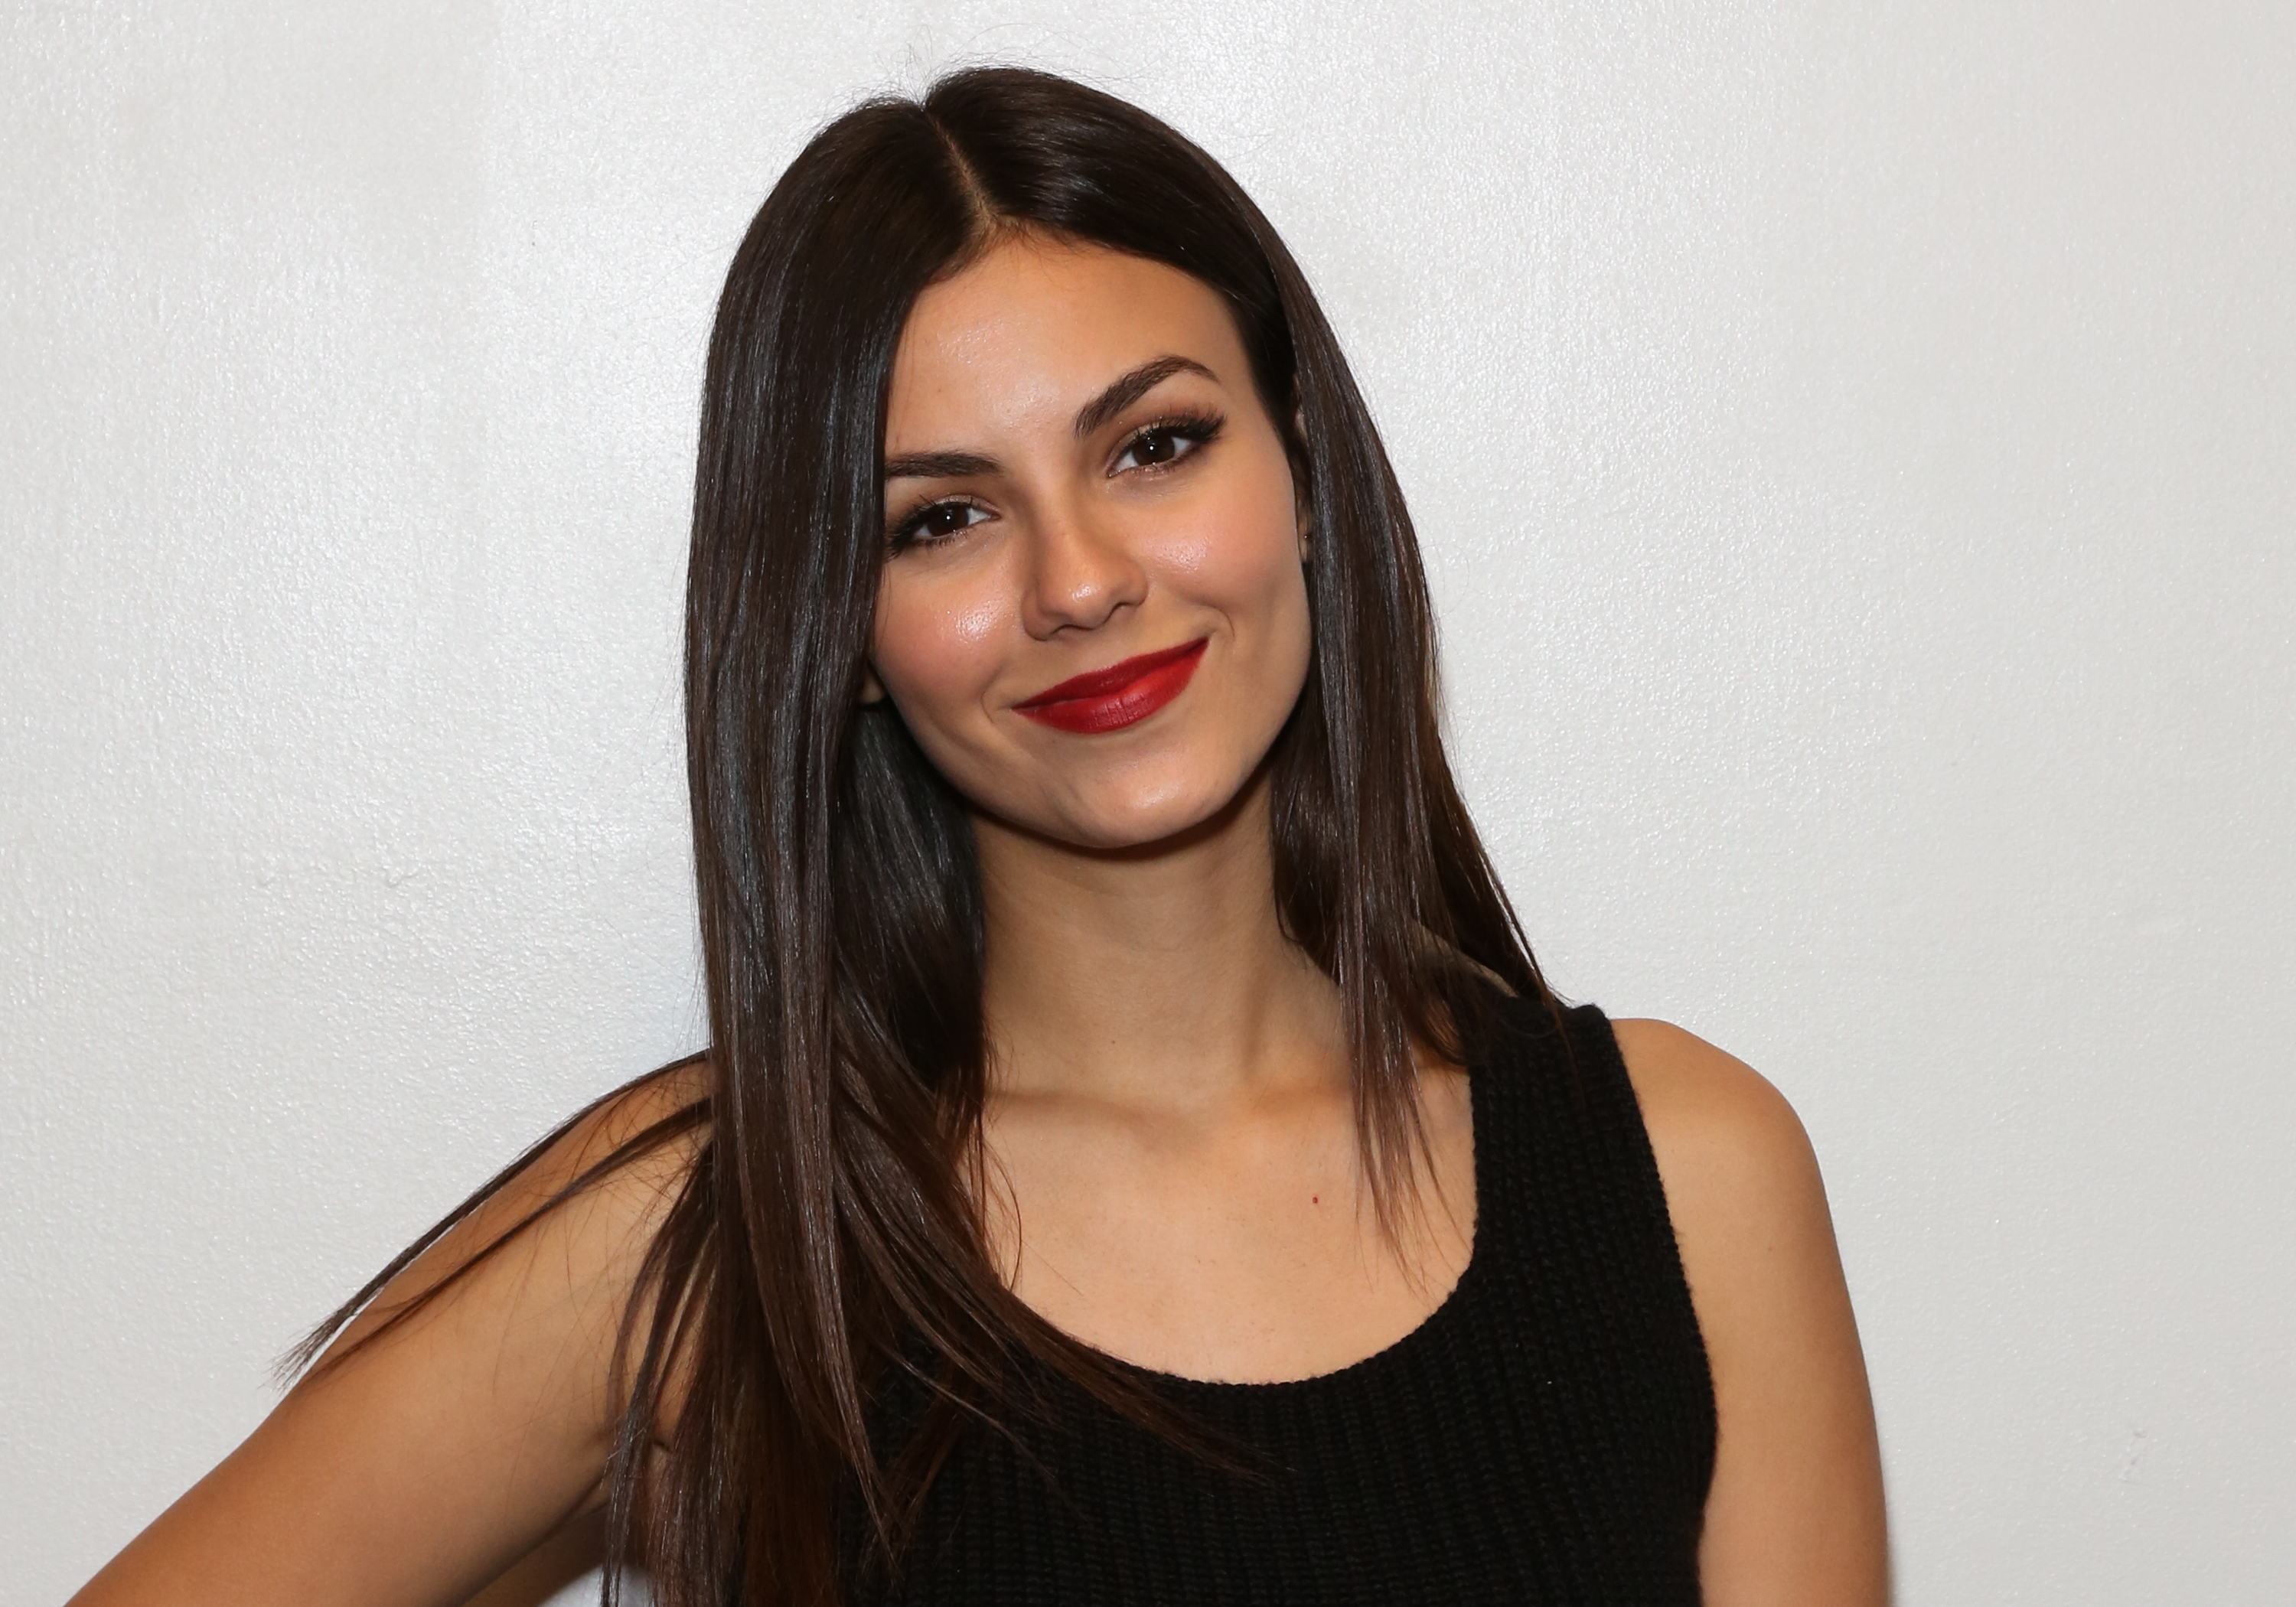 Latest Victoria Justice News, Photos and Videos | J-14